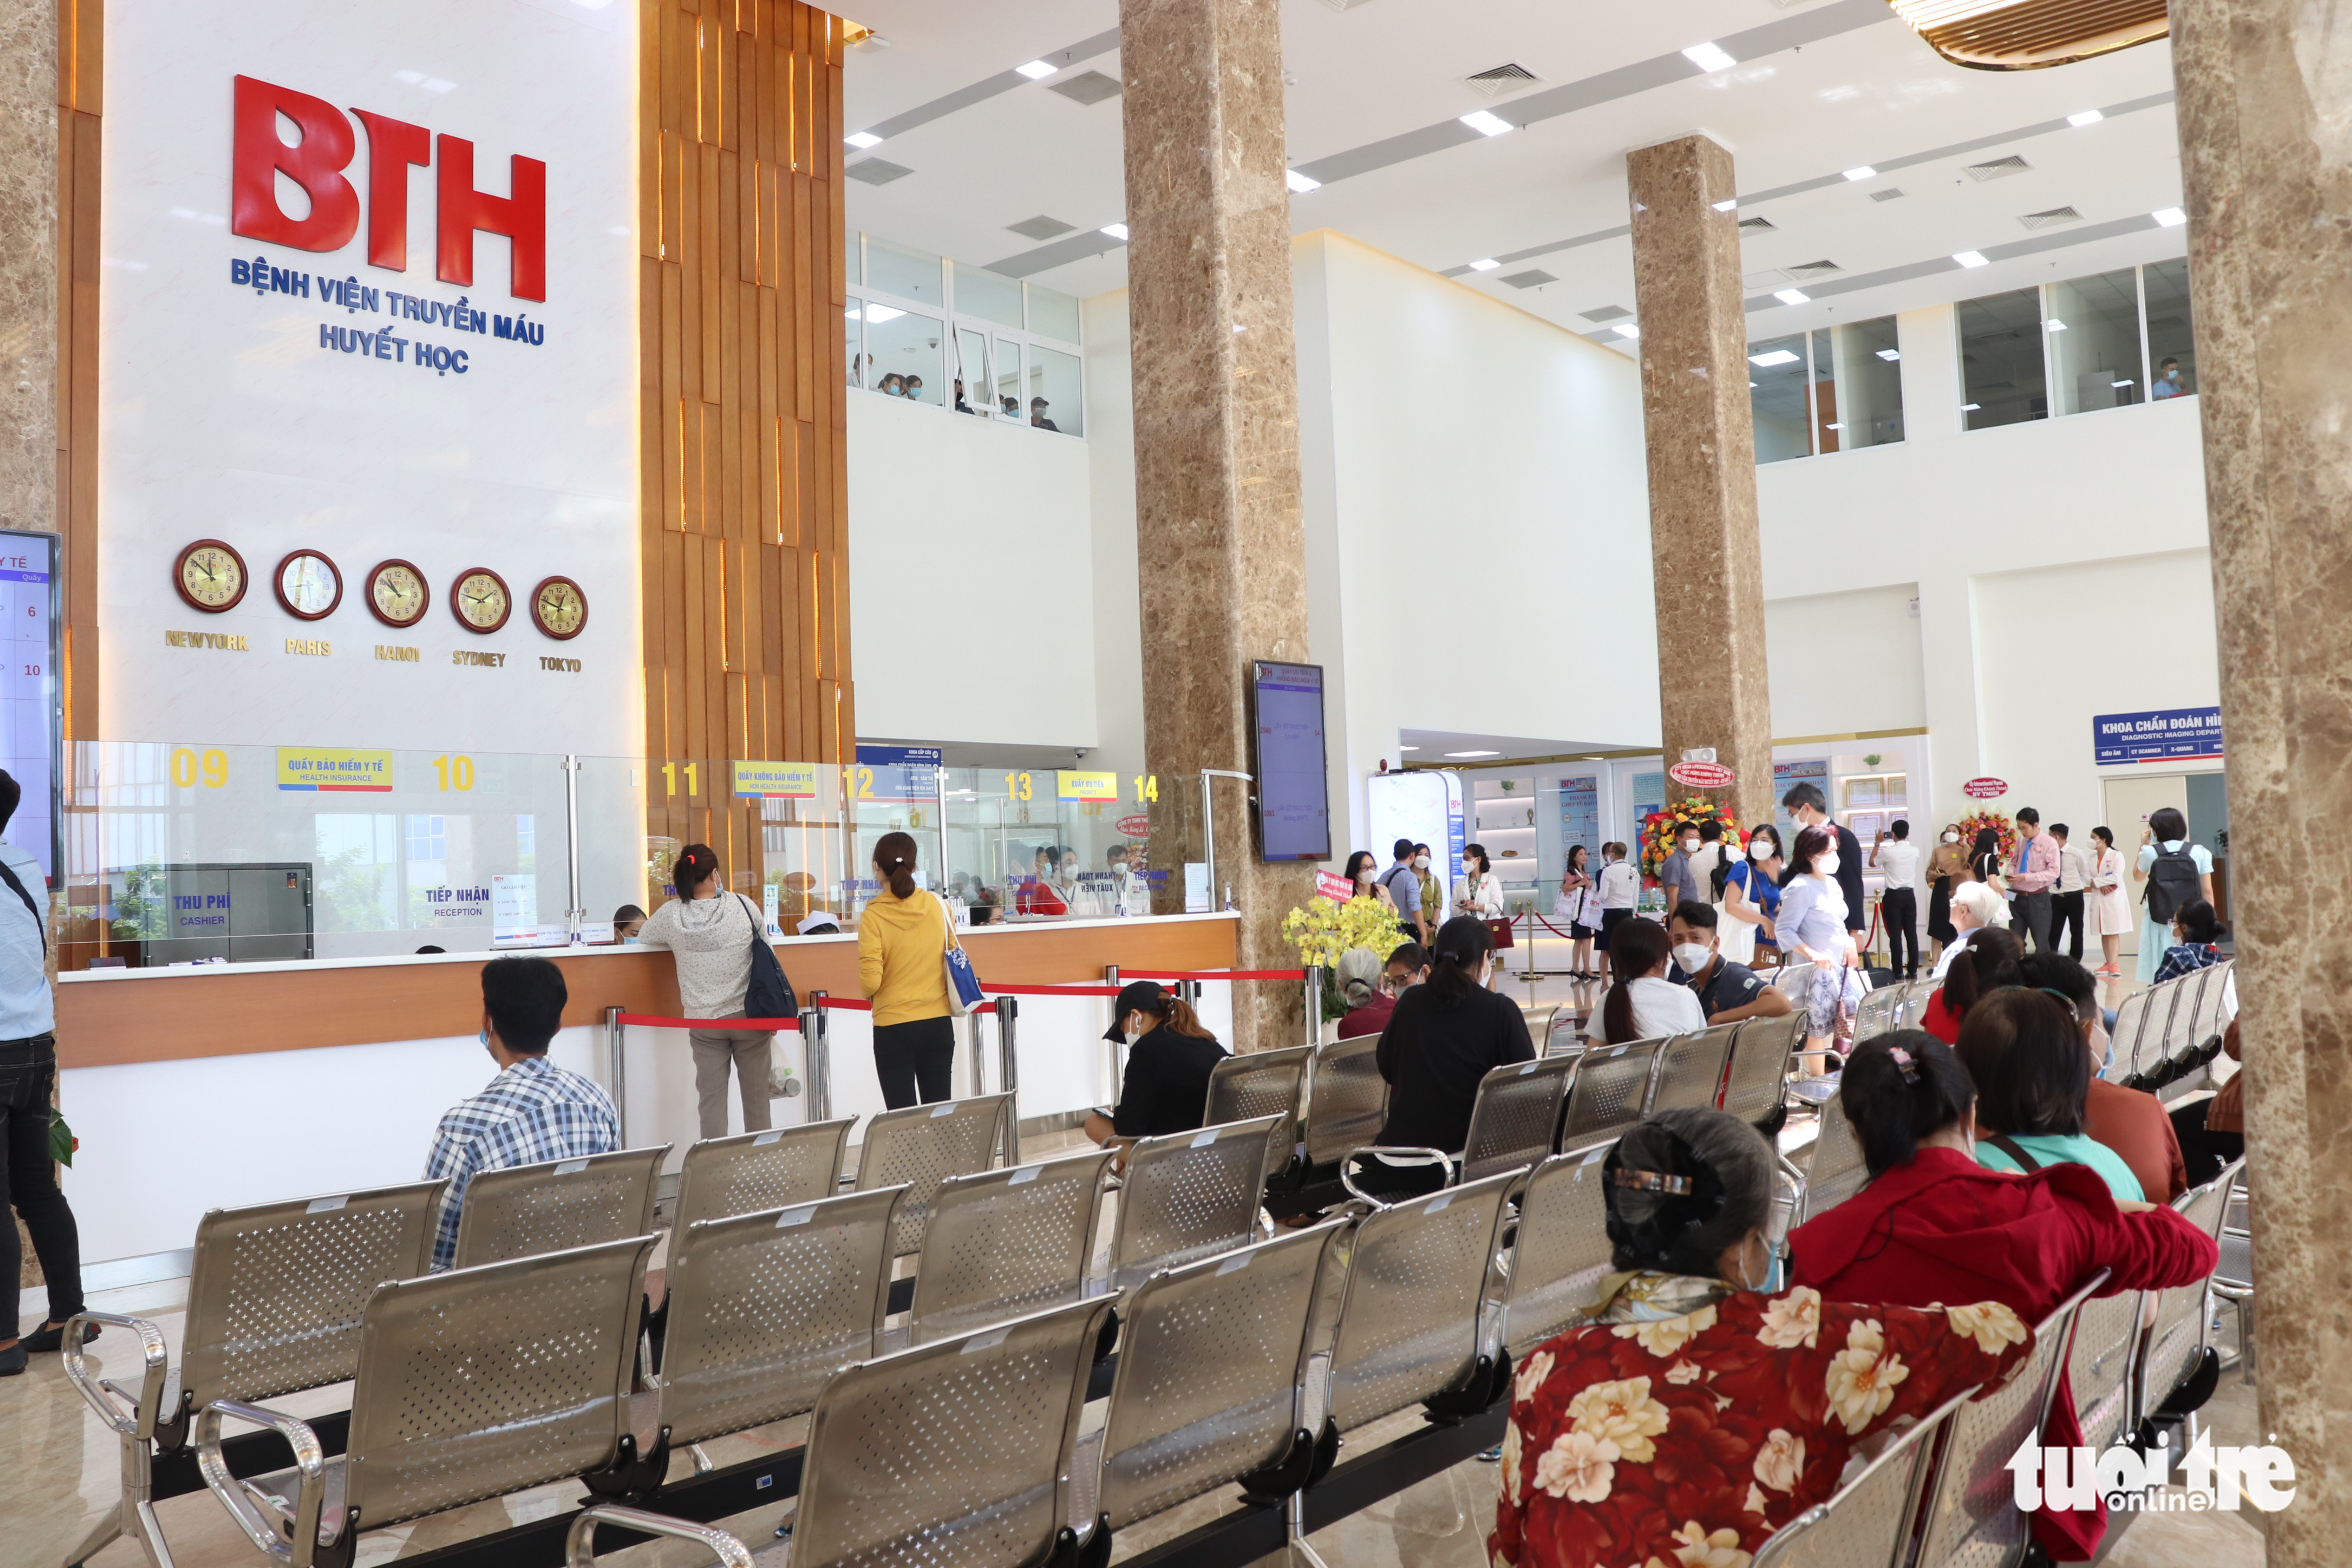 Patients are pictured at the second branch of the Ho Chi Minh City Blood Transfusion Hematology Hospital in Binh Chanh District, Ho Chi Minh City, May 20, 2022. Photo: Xuan Mai / Tuoi Tre